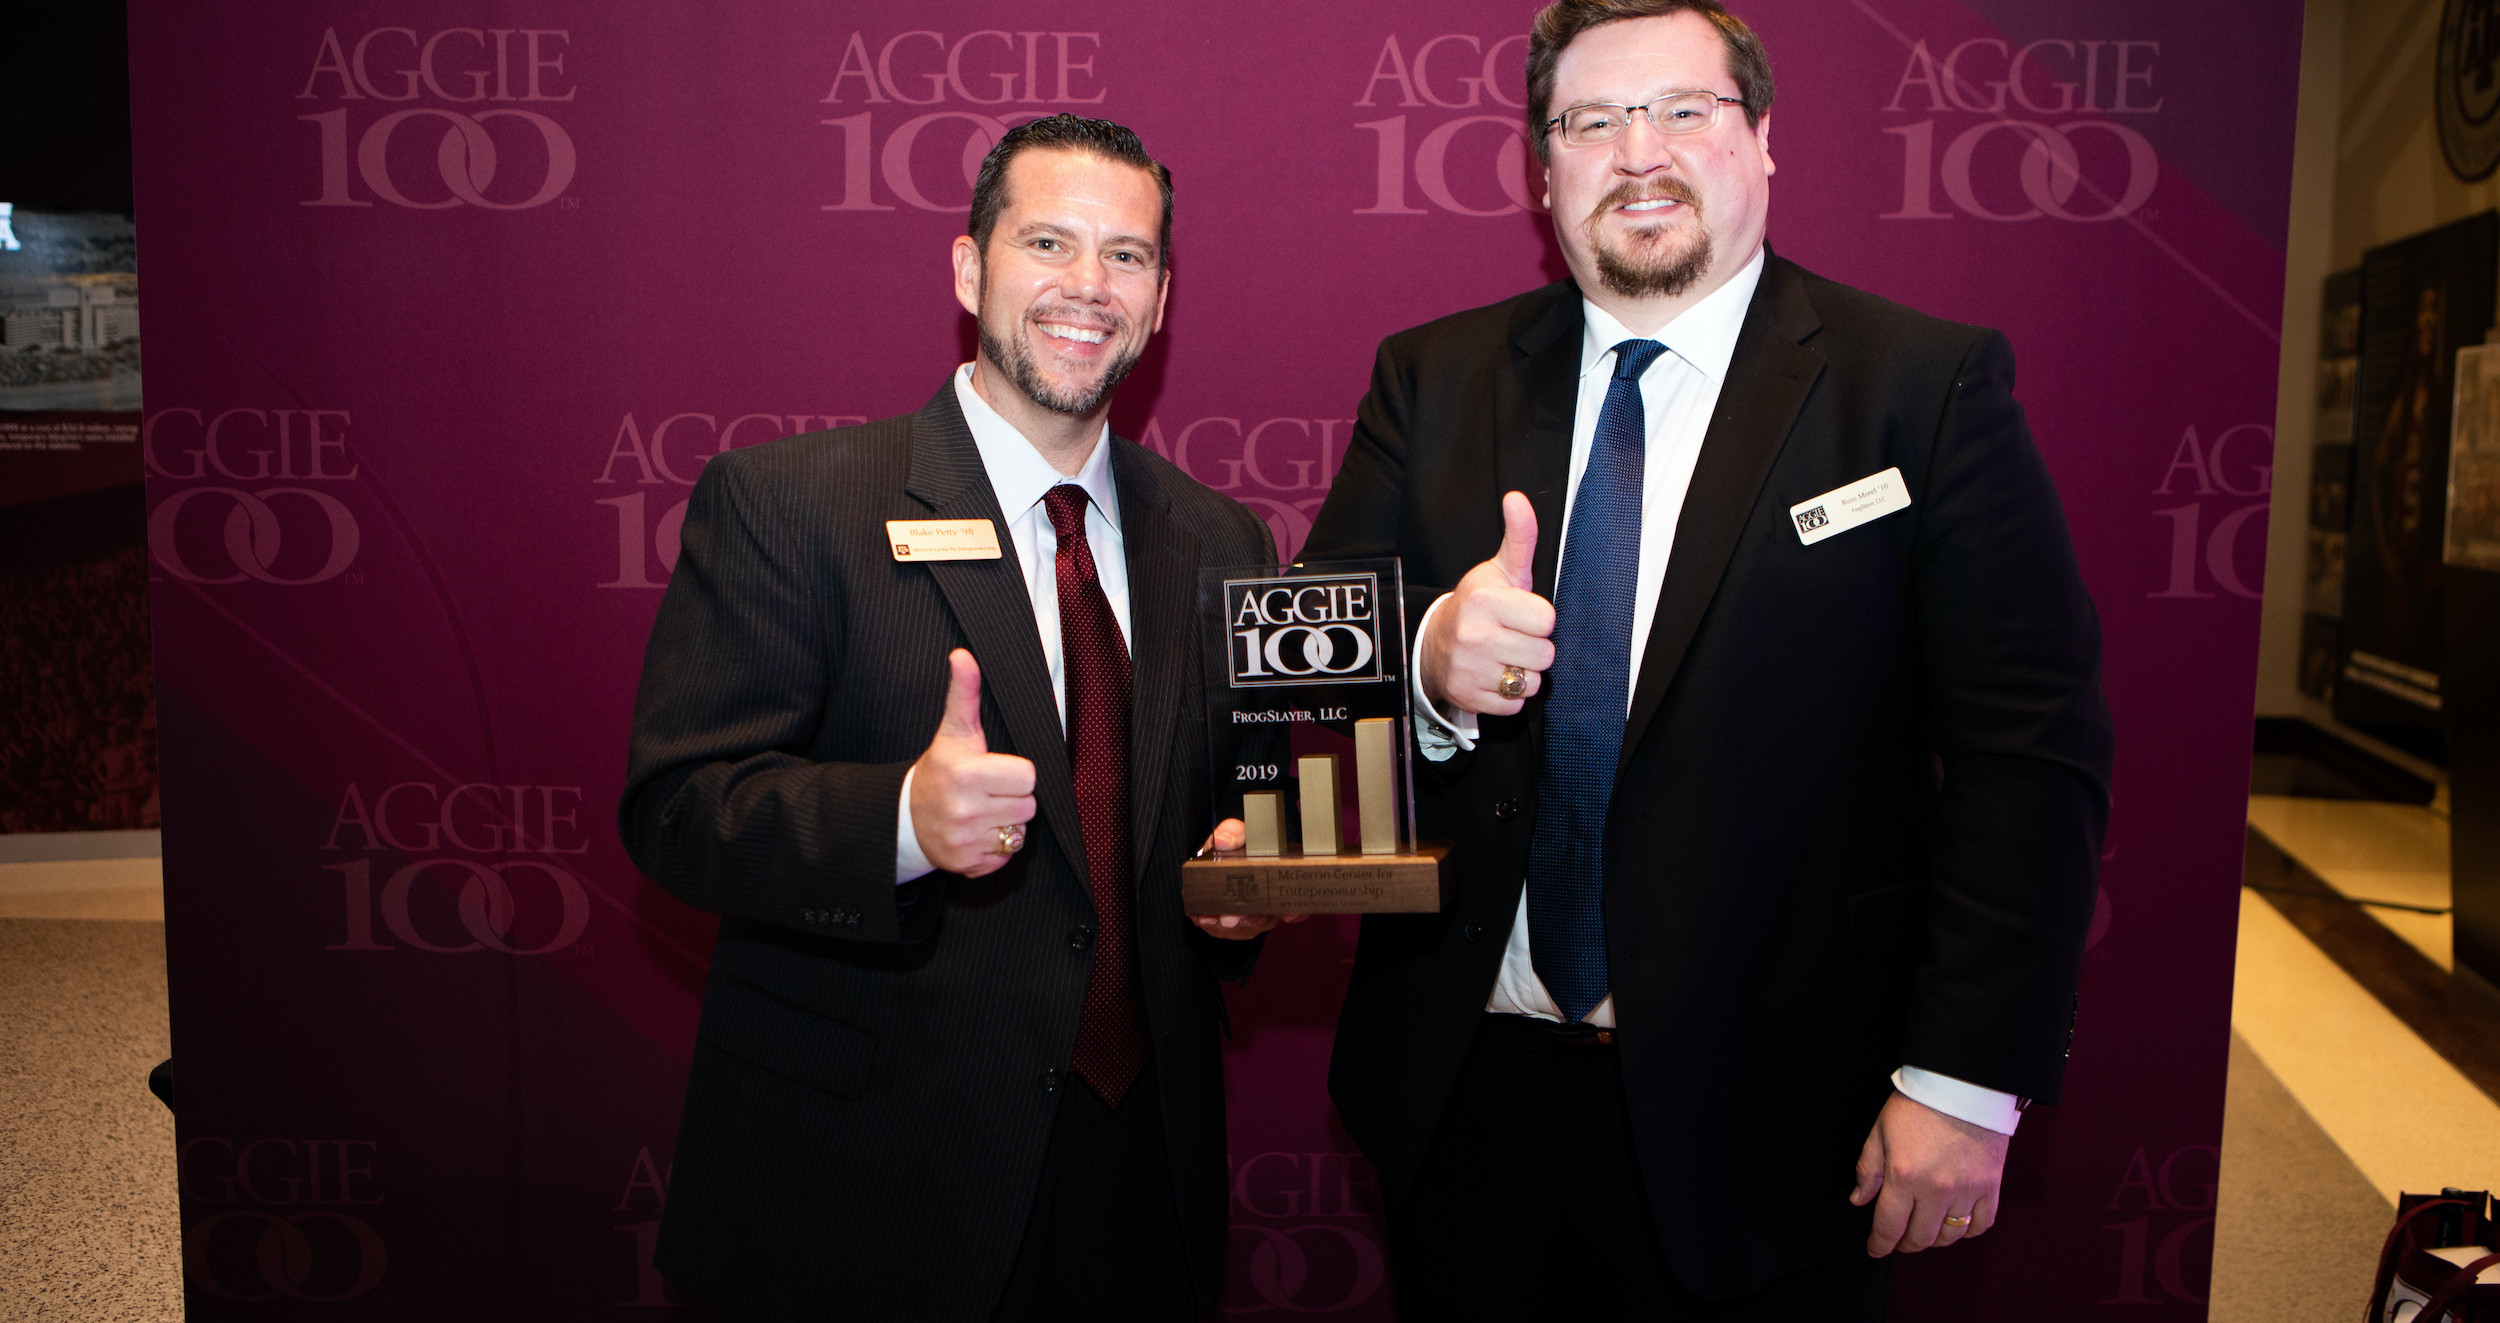 Ross Morel accepting an Aggie 100 award